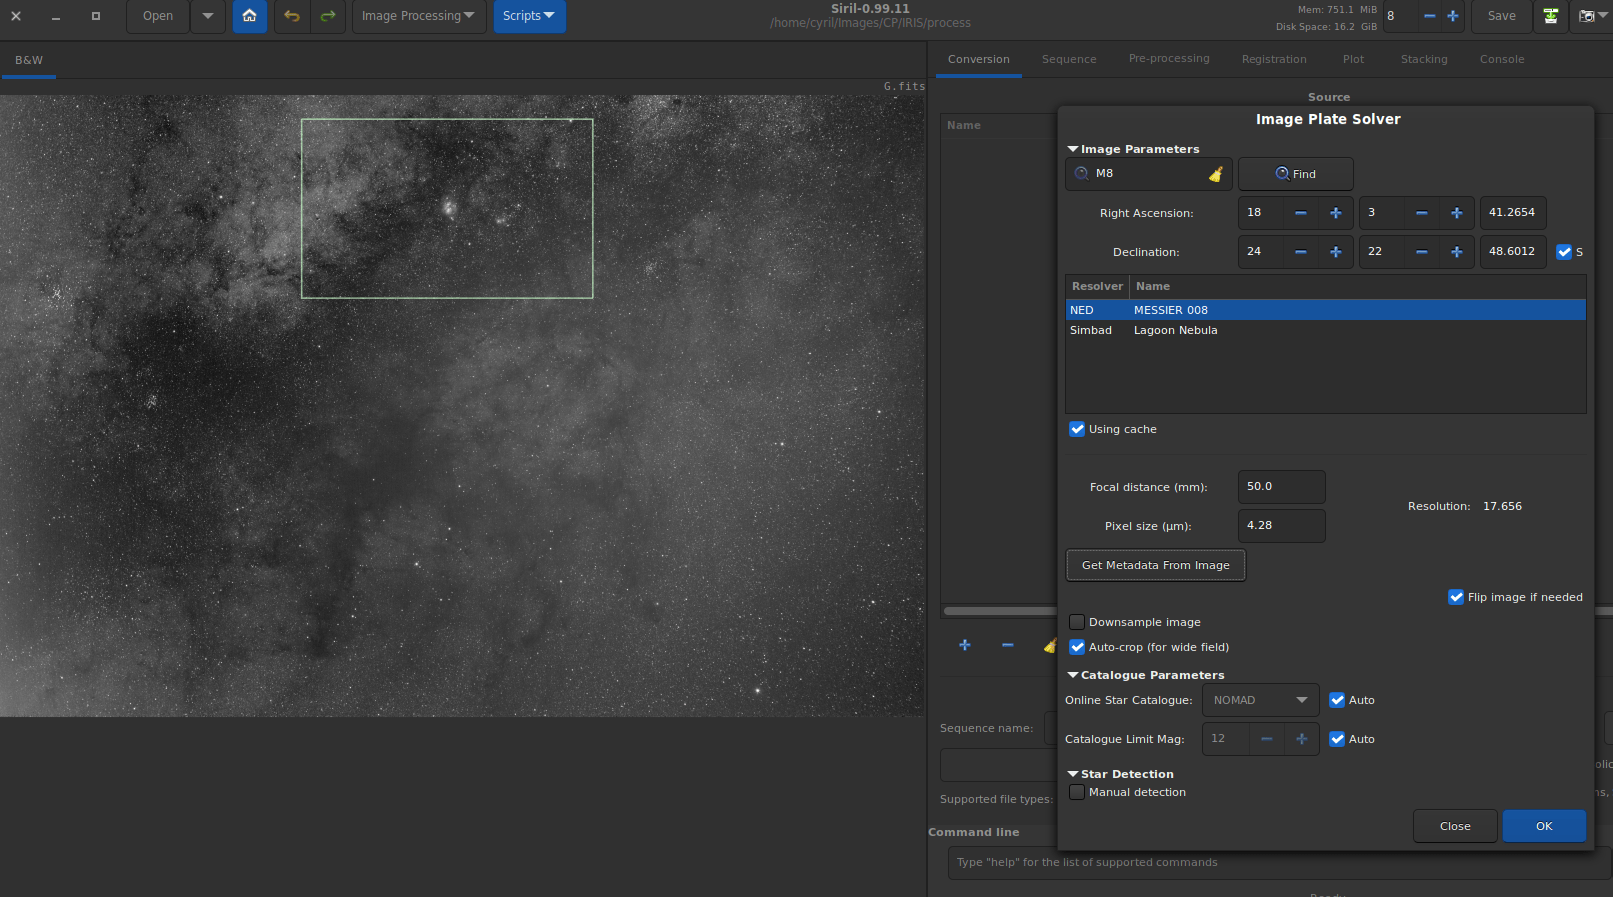 It is now possible to perform astrometry on part of the image by making a selection around a known object, here M8, the Lagoon Nebula.